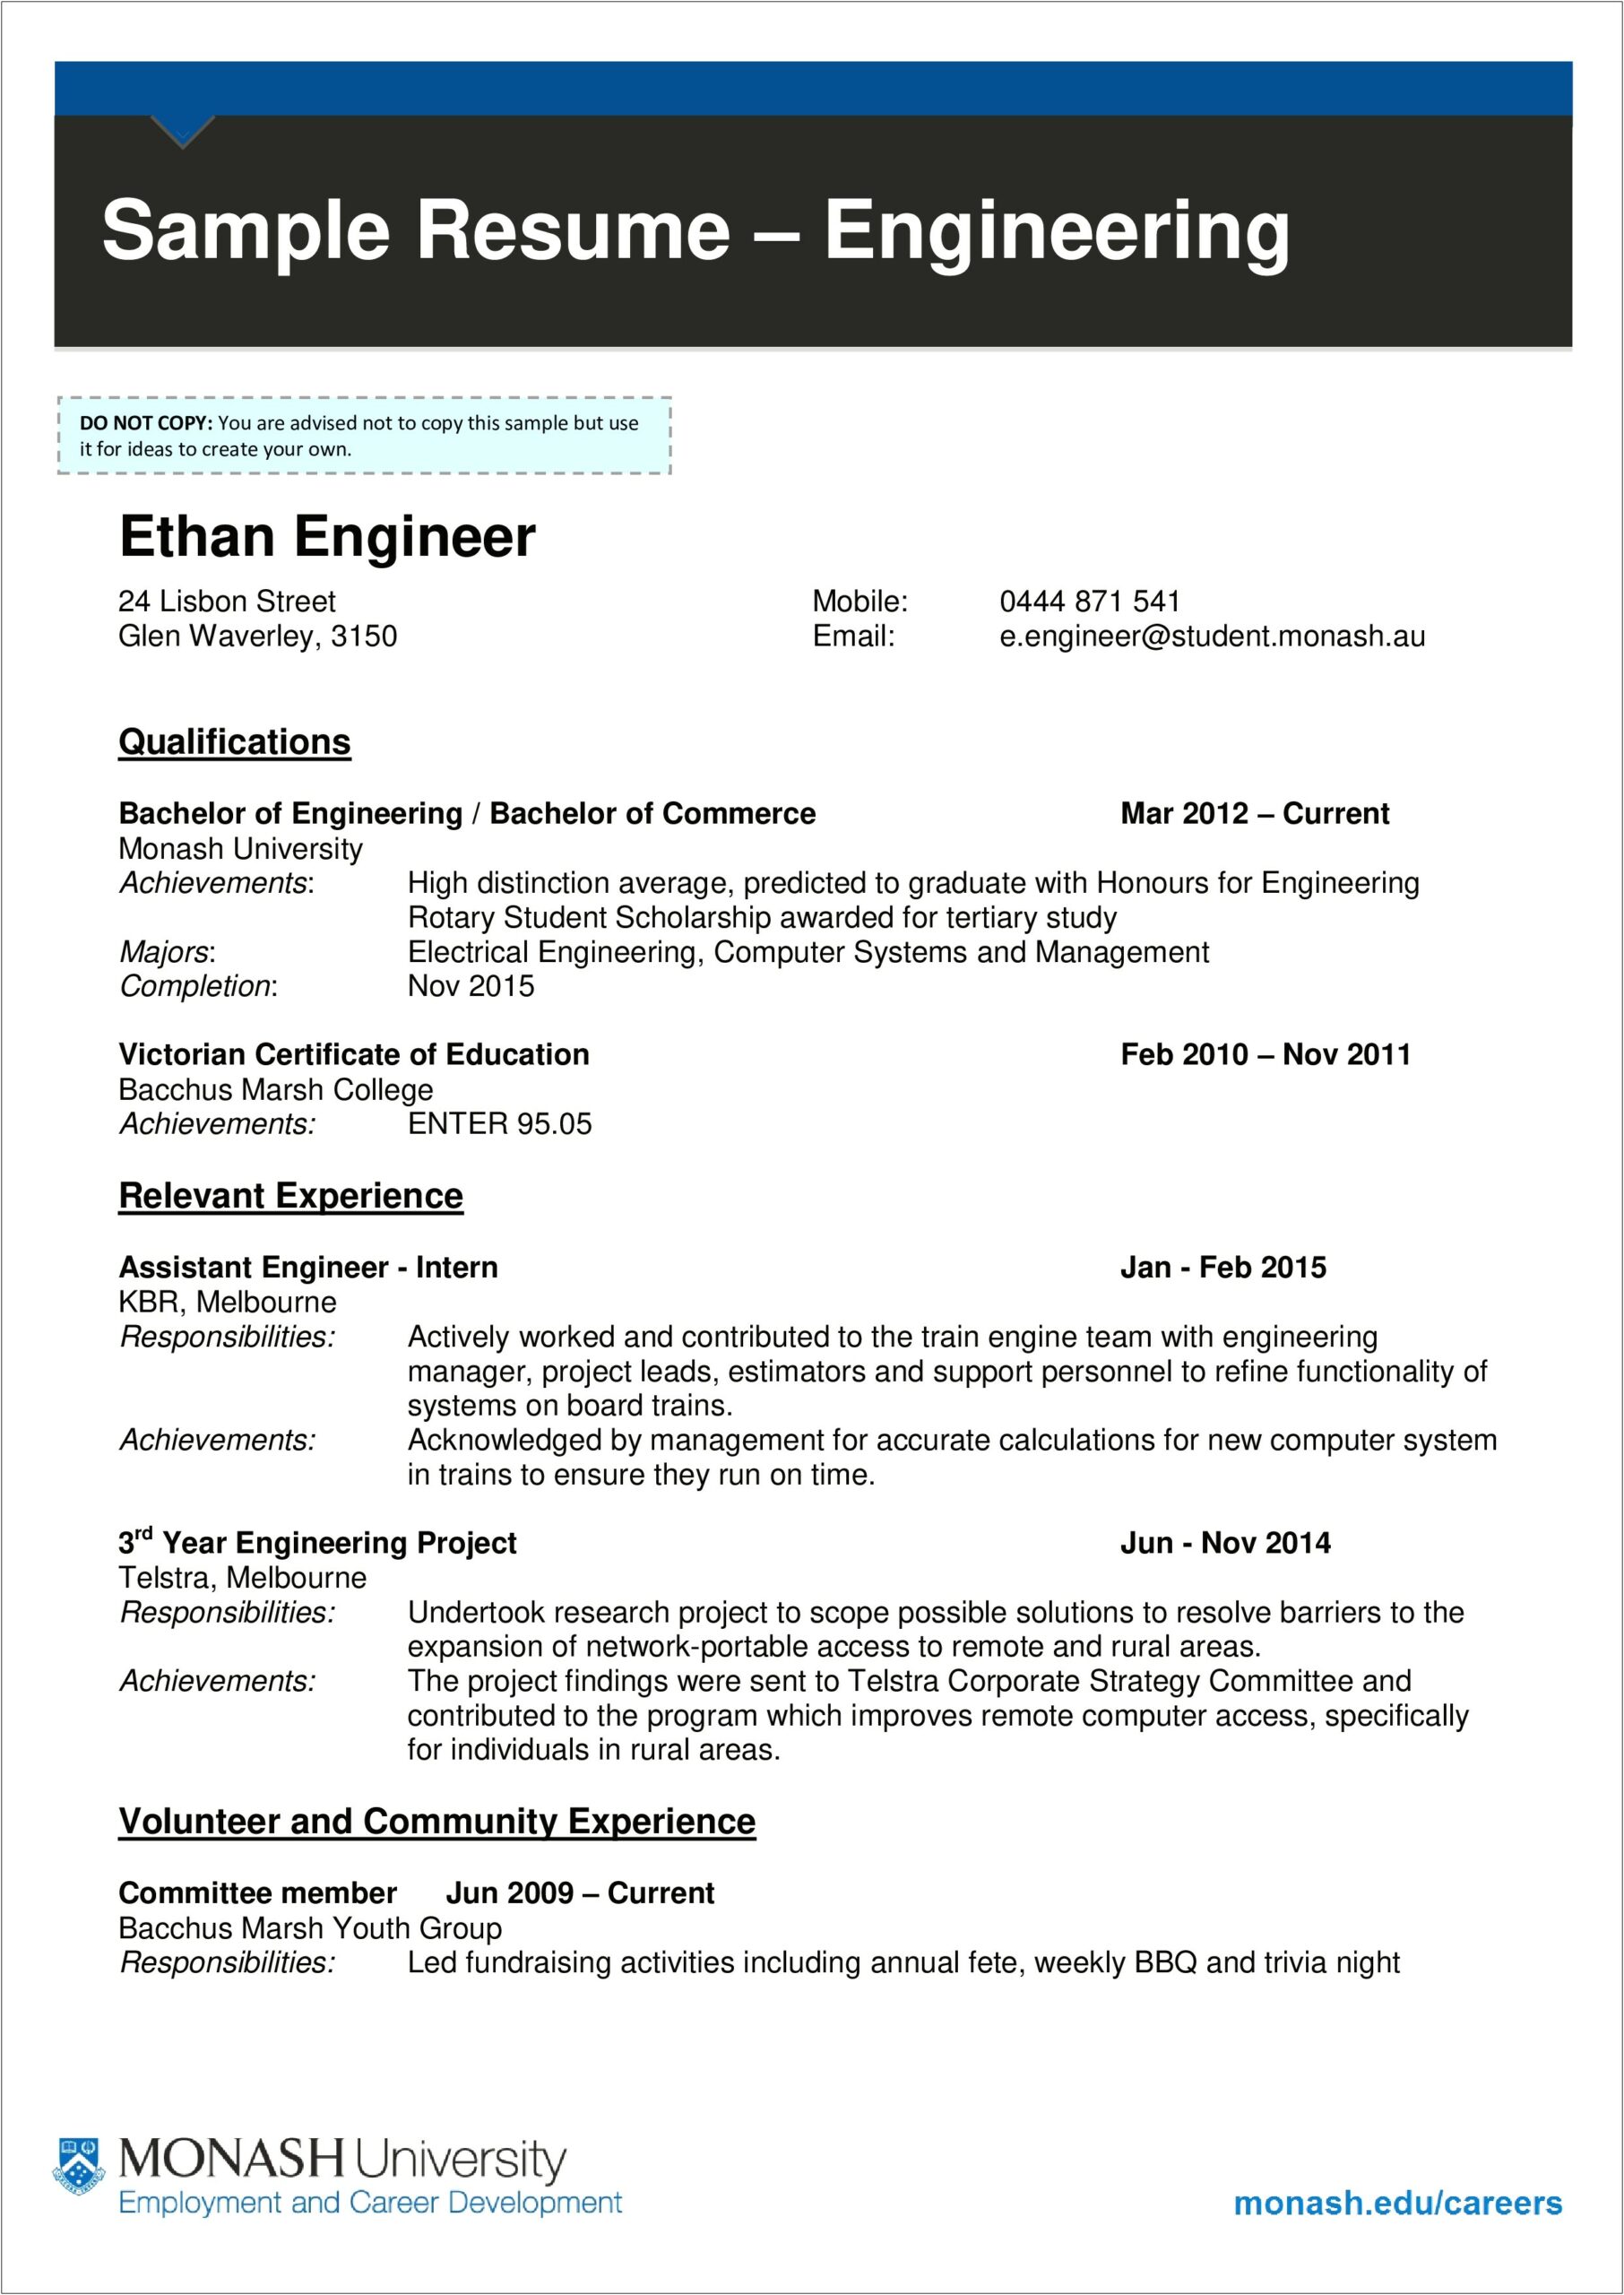 Resume Format Free Download For Freshers Engineers